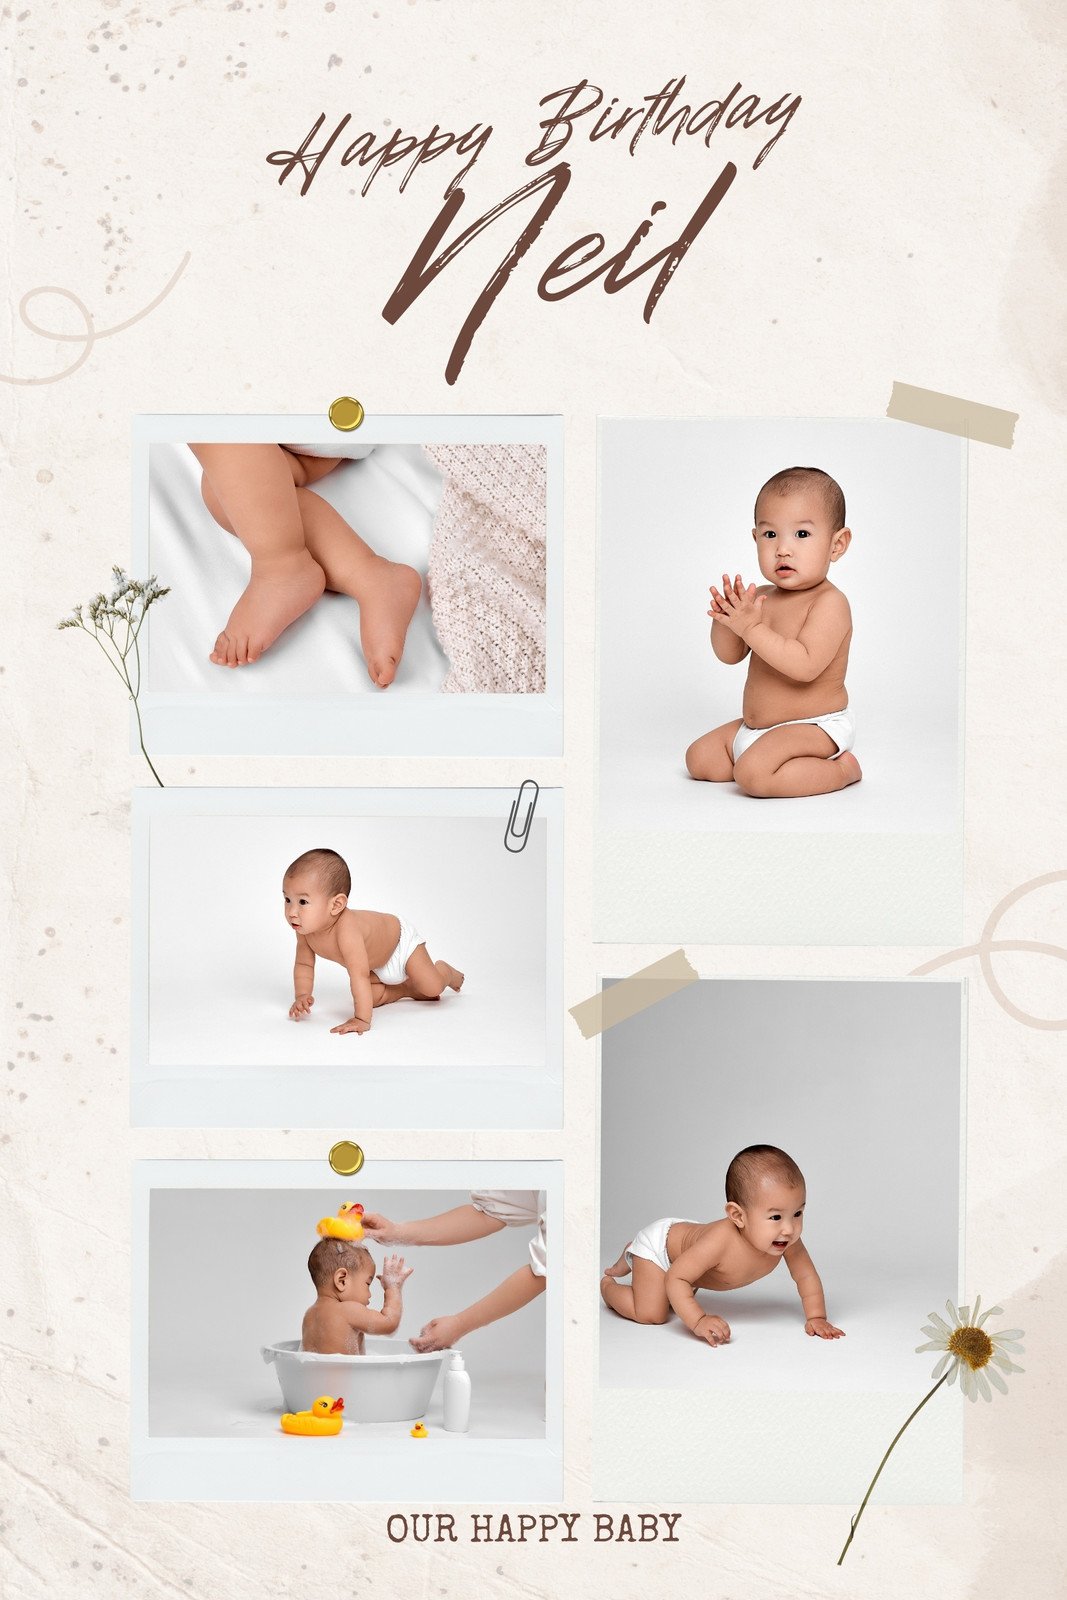 Page 2 - Free and customizable baby photo collage templates